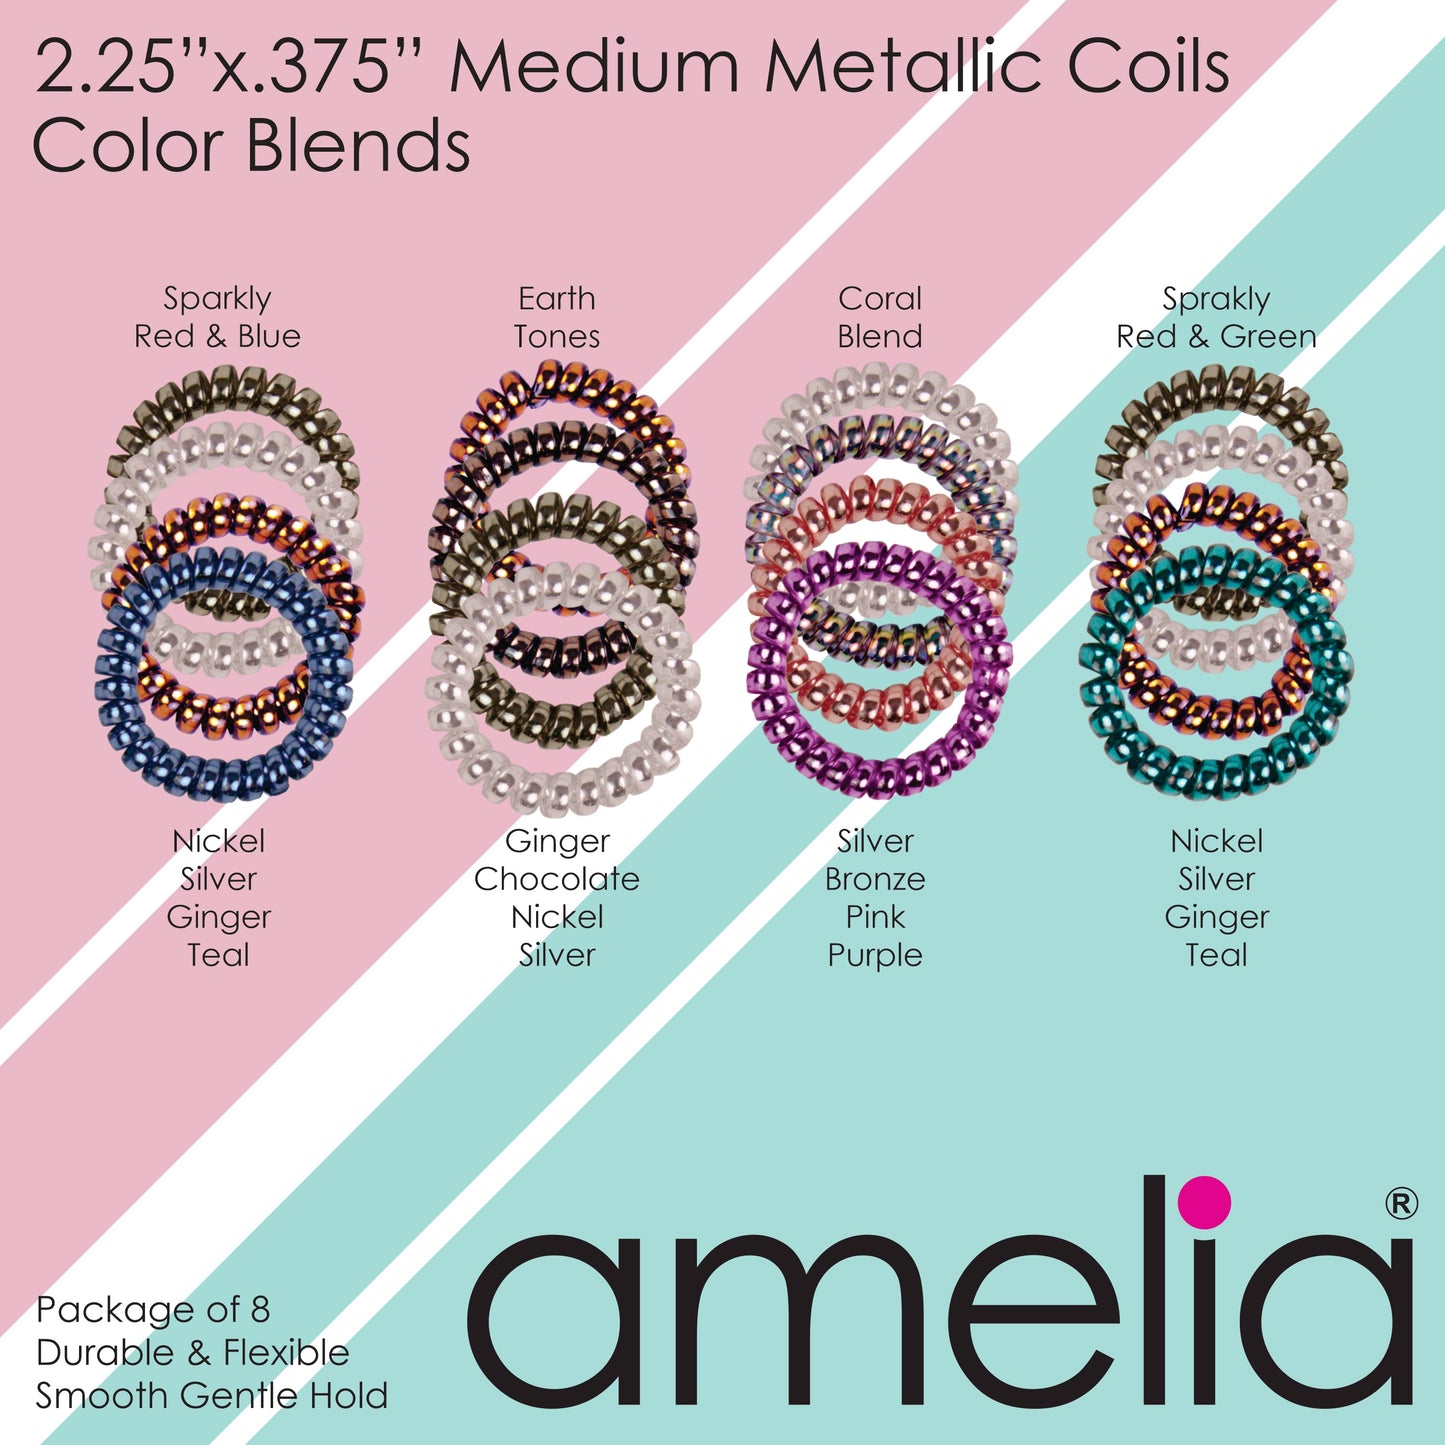 Amelia Beauty Products 8 Medium Smooth Elastic Hair Coils, 2.25in Diameter Spiral Hair Ties, Gentle on Hair, Strong Hold and Minimizes Dents and Creases, Chocolate